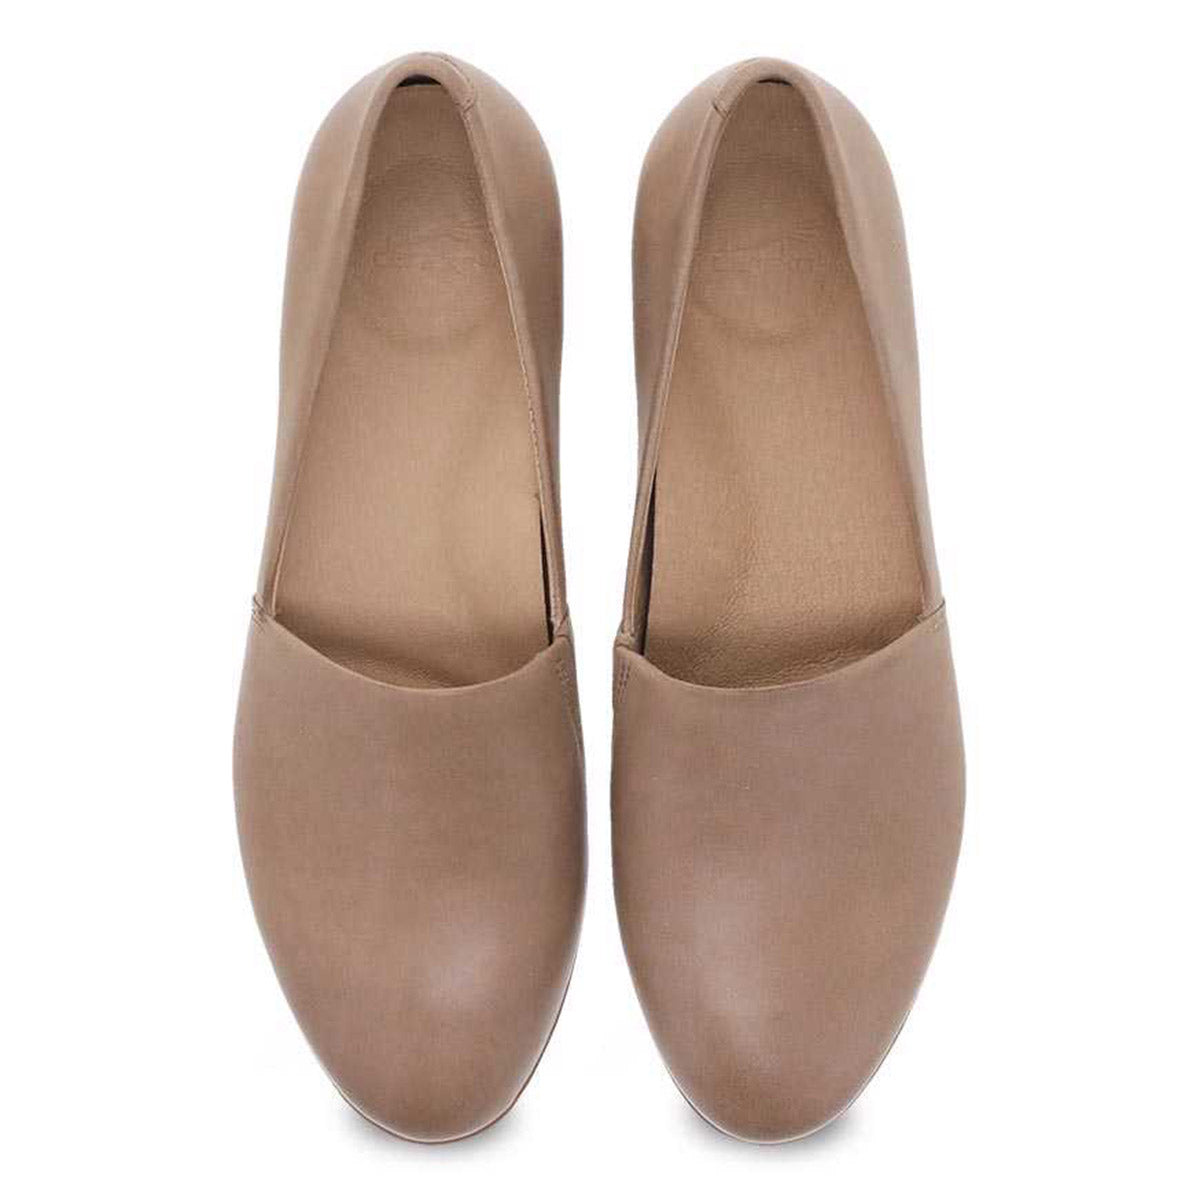 A pair of women&#39;s Dansko Larisa Tan flat shoes with arch support isolated on a white background.